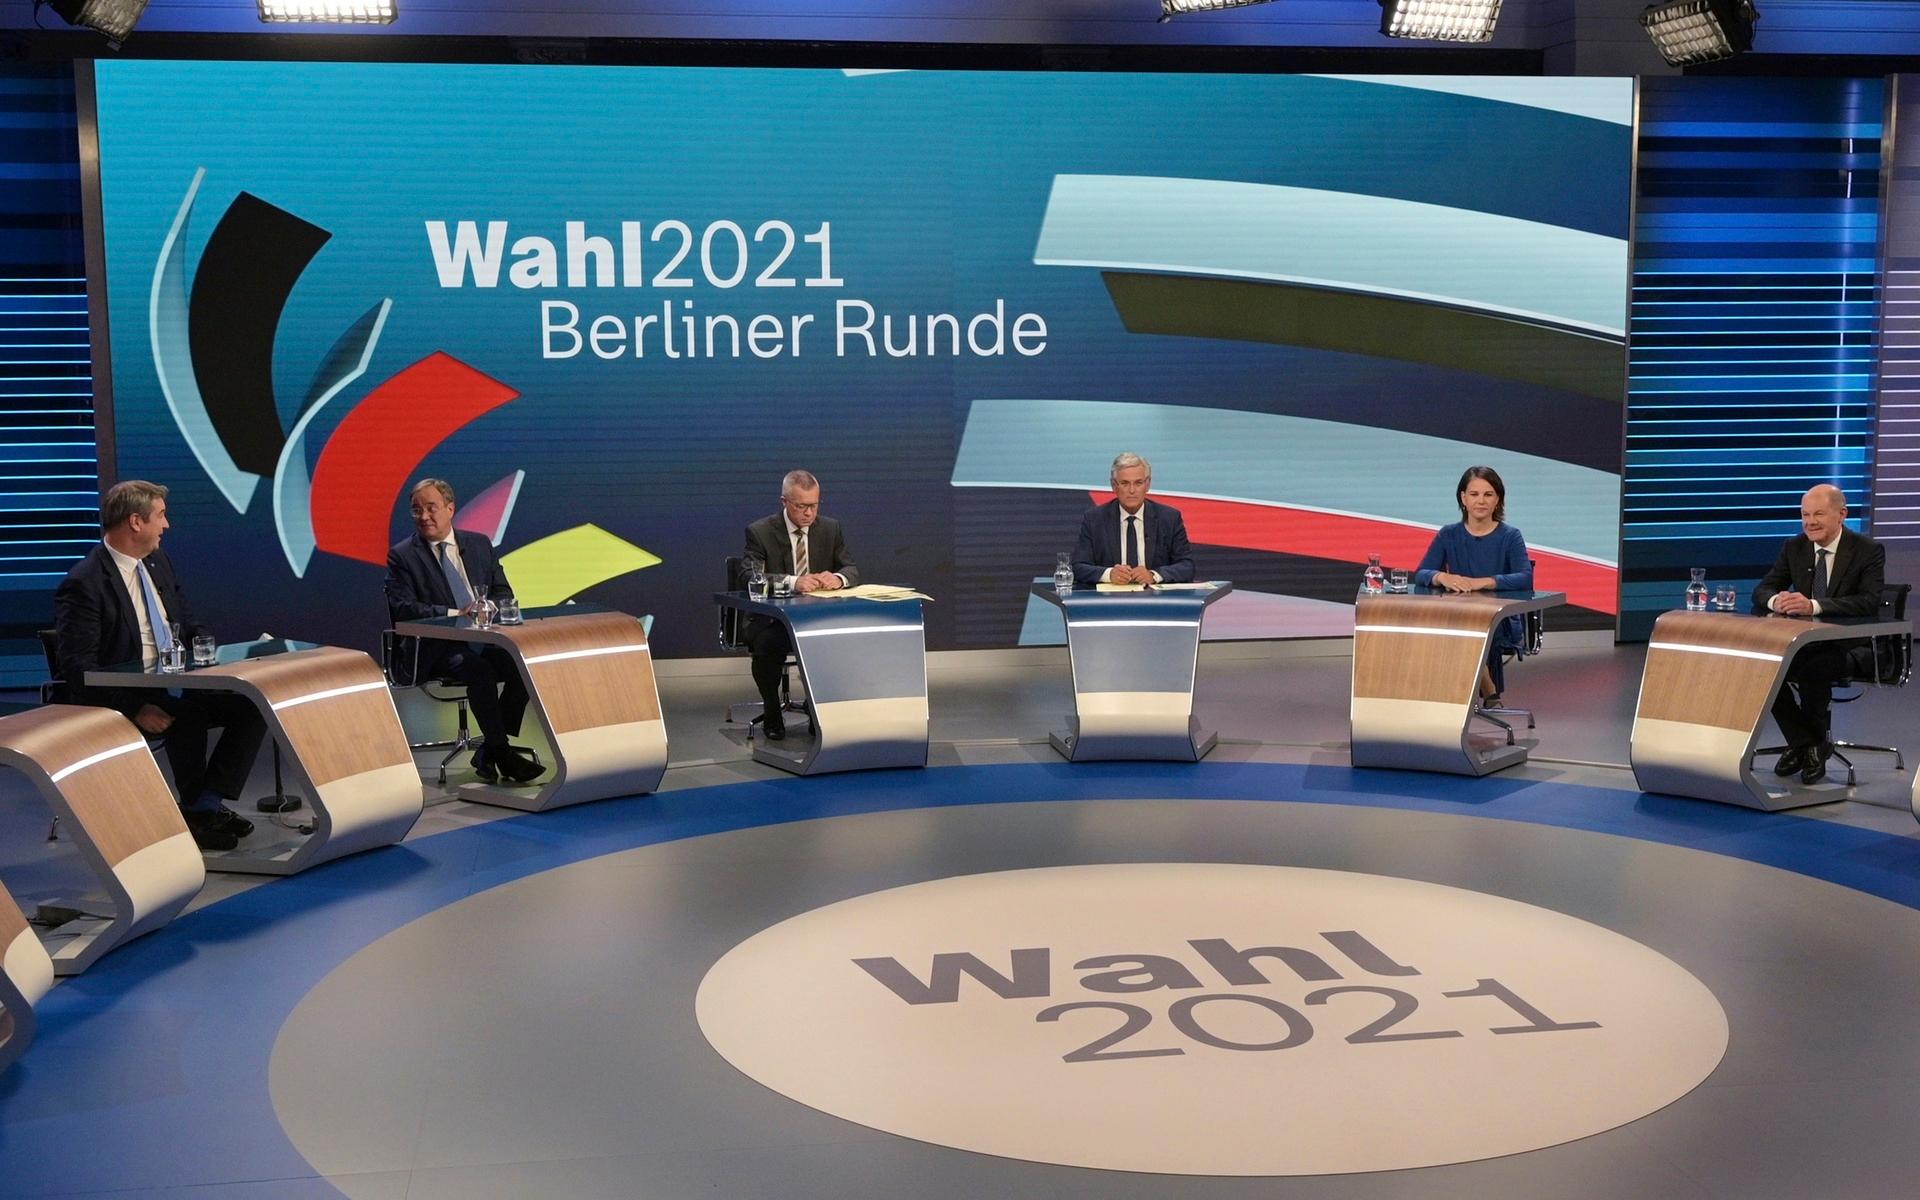 From left: CSU leader Markus Soeder, Armin Laschet of the CDU, the CDU/CSU&apos;s candidate for chancellor, moderators Rainald Becker and Peter Frey, Annalena Baerbock, candidate for chancellor of the Green Party, Olaf Scholz, candidate for chancellor of the SPD, prepare to talk about the Bundestag election in an election studio of ZDF at the &quot;Berliner Runde&quot; Sunday Sept. 2021 in Berlin. Projections show Germany’s center-left Social Democrats locked in a very close race with outgoing German Chancellor Angela Merkel’s center-right bloc, which is heading toward its worst-ever result in the country’s parliamentary election. (Sebastian Gollnow/Pool via AP)  TH111